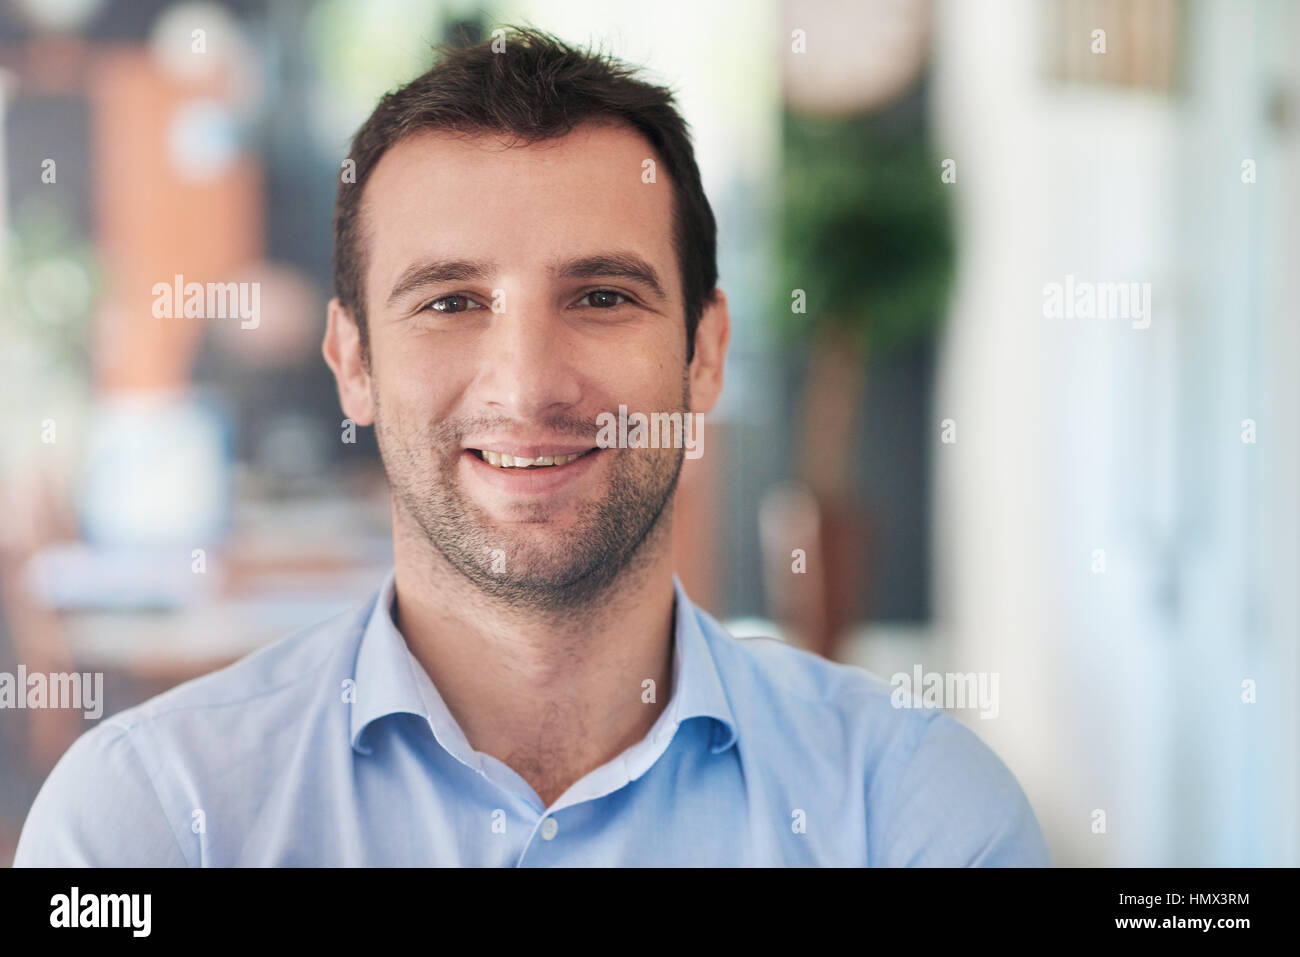 He's a confident and successful businessman Stock Photo